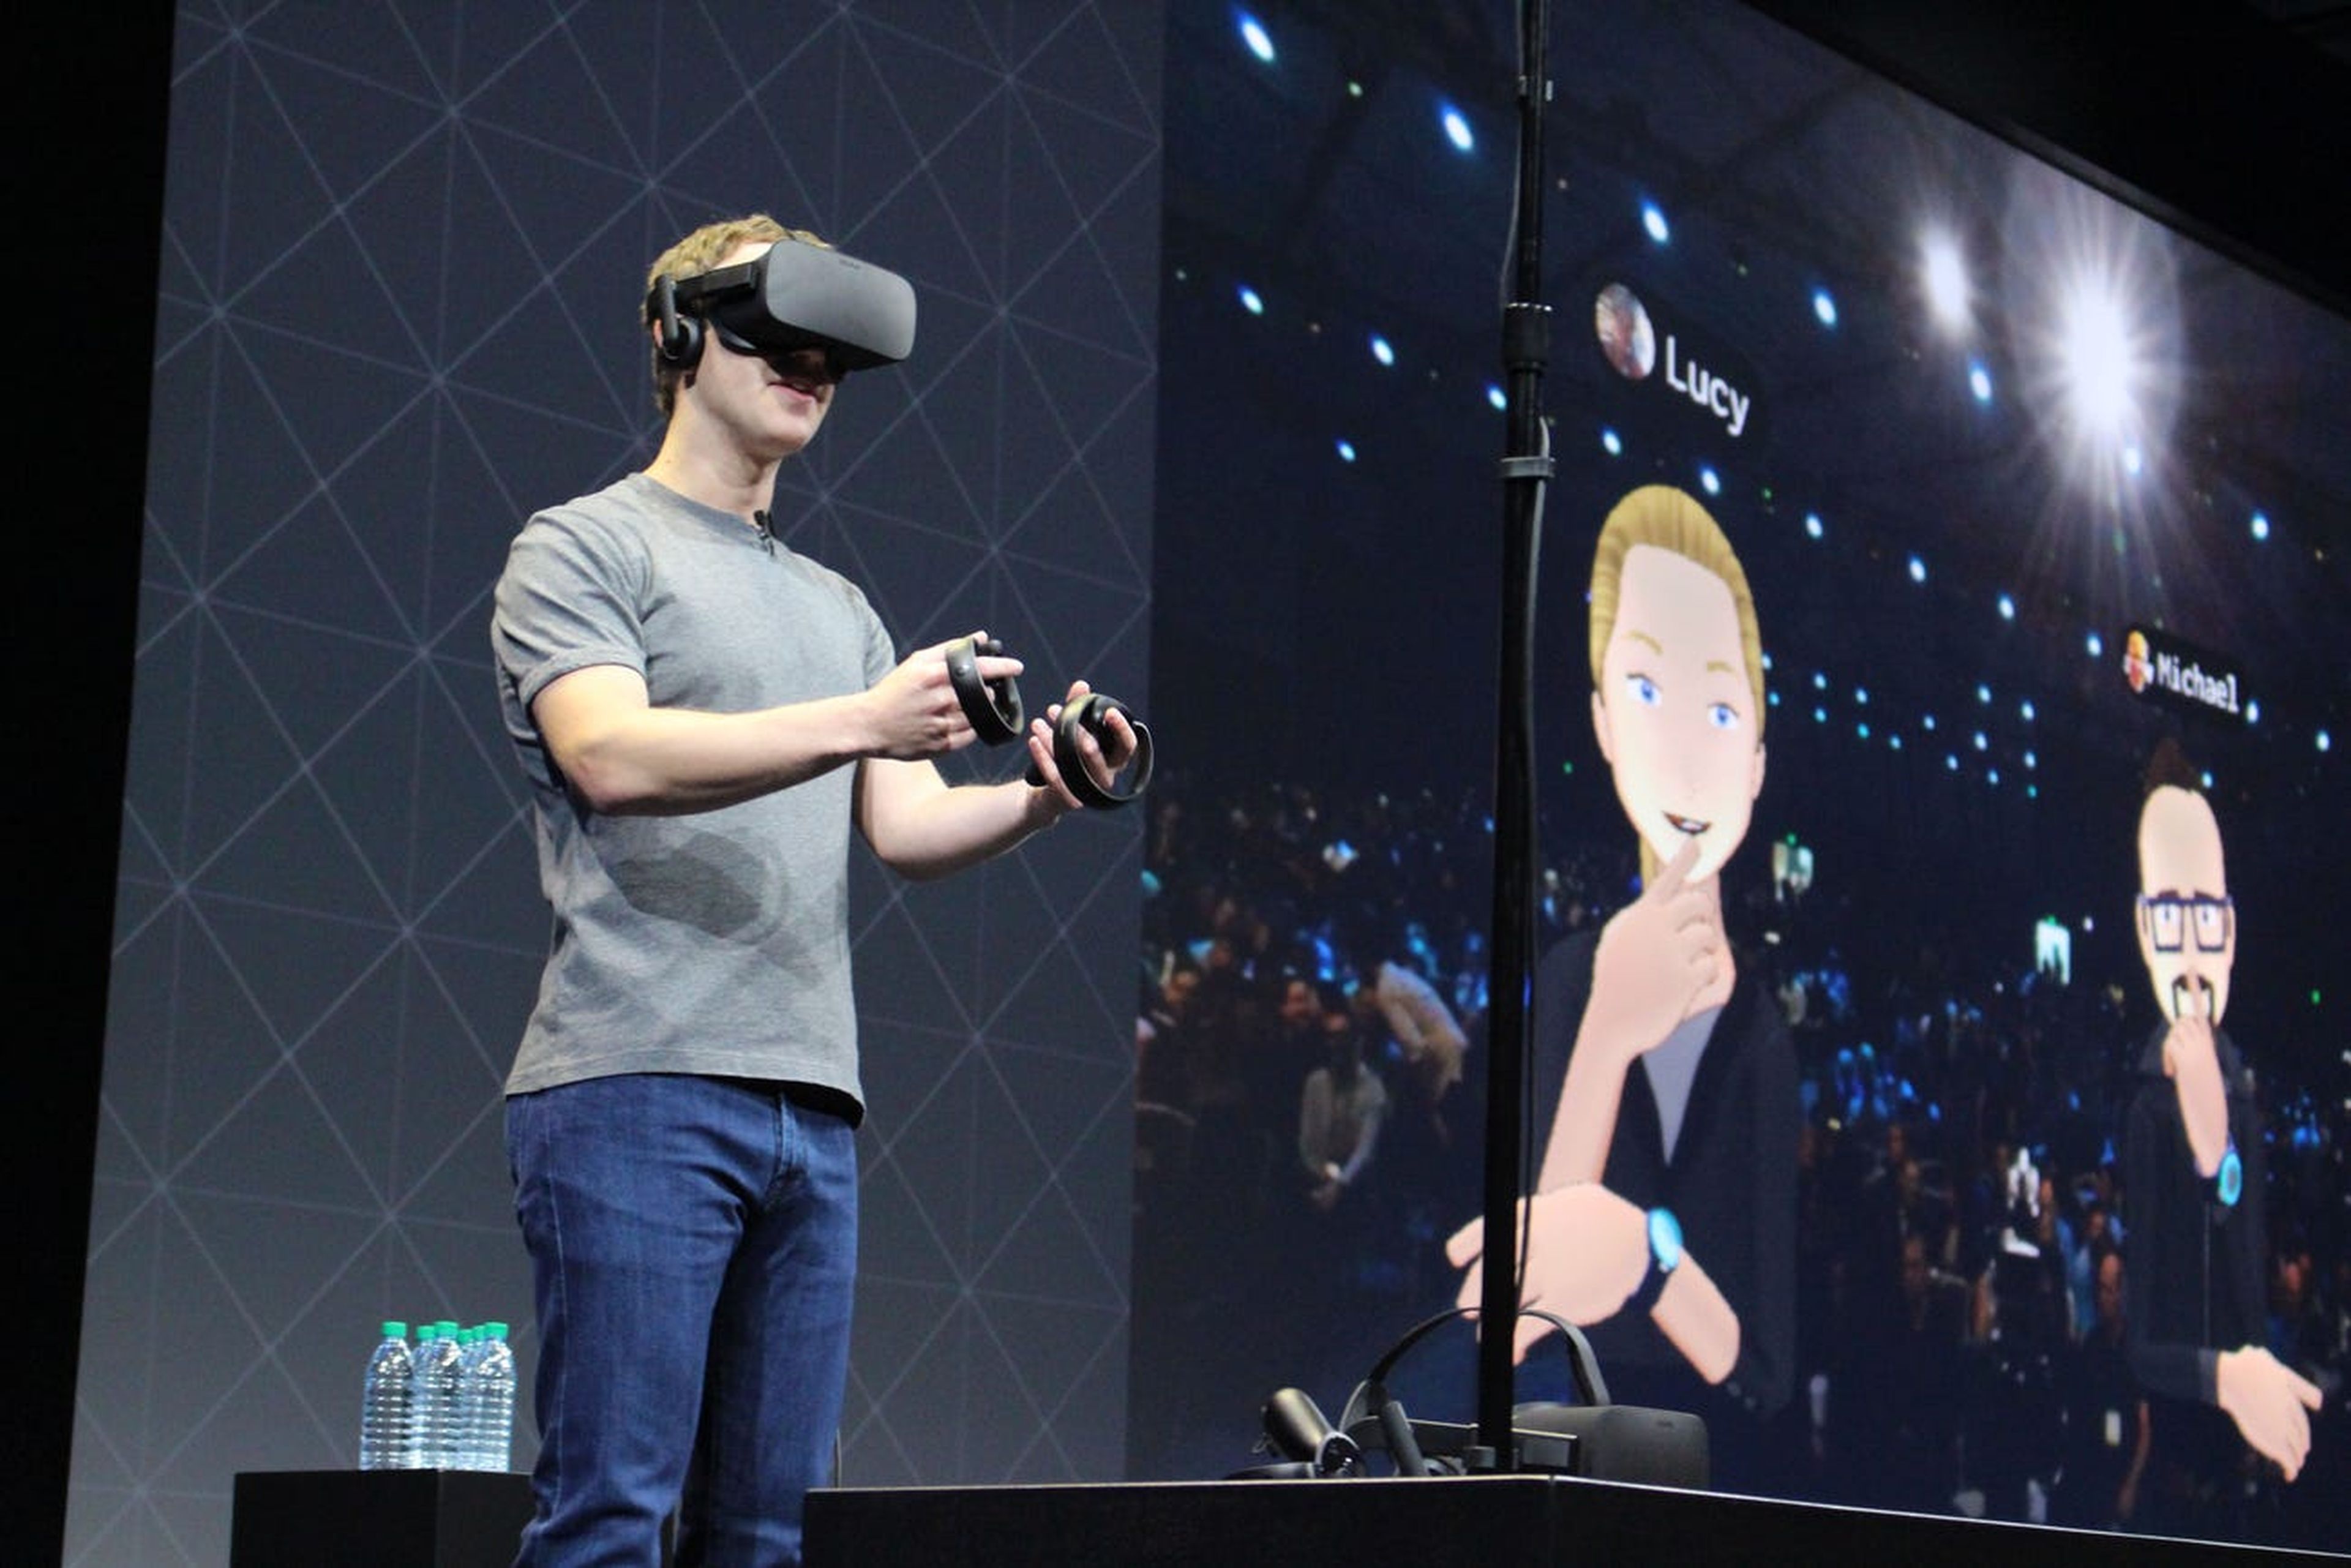 Facebook CEO Mark Zuckerberg on stage at an Oculus developers conference in 2016.